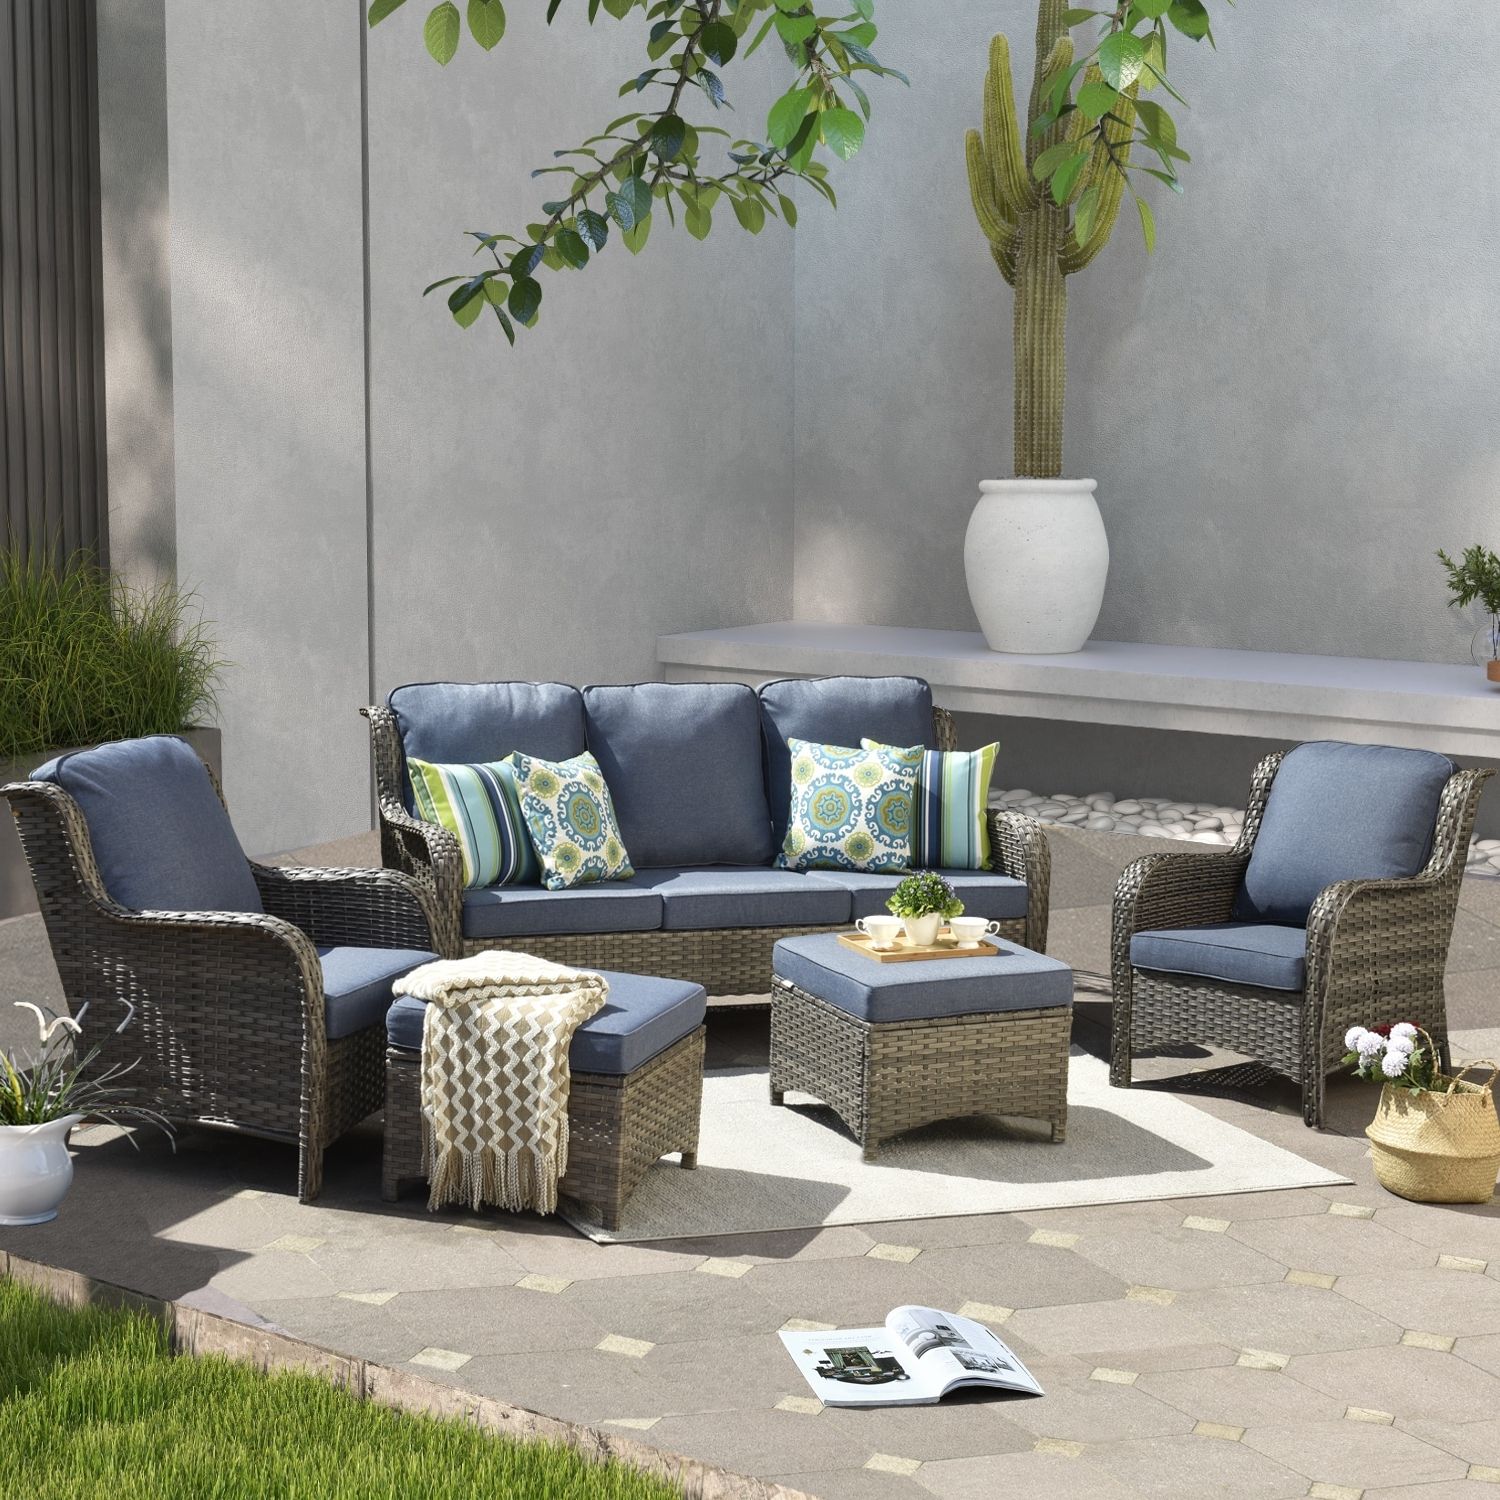 Current Ovios 5 Piece Patio Conversation Wicker Furniture Set – On Sale – – 31733697 Within 5 Piece Patio Furniture Set (View 9 of 15)